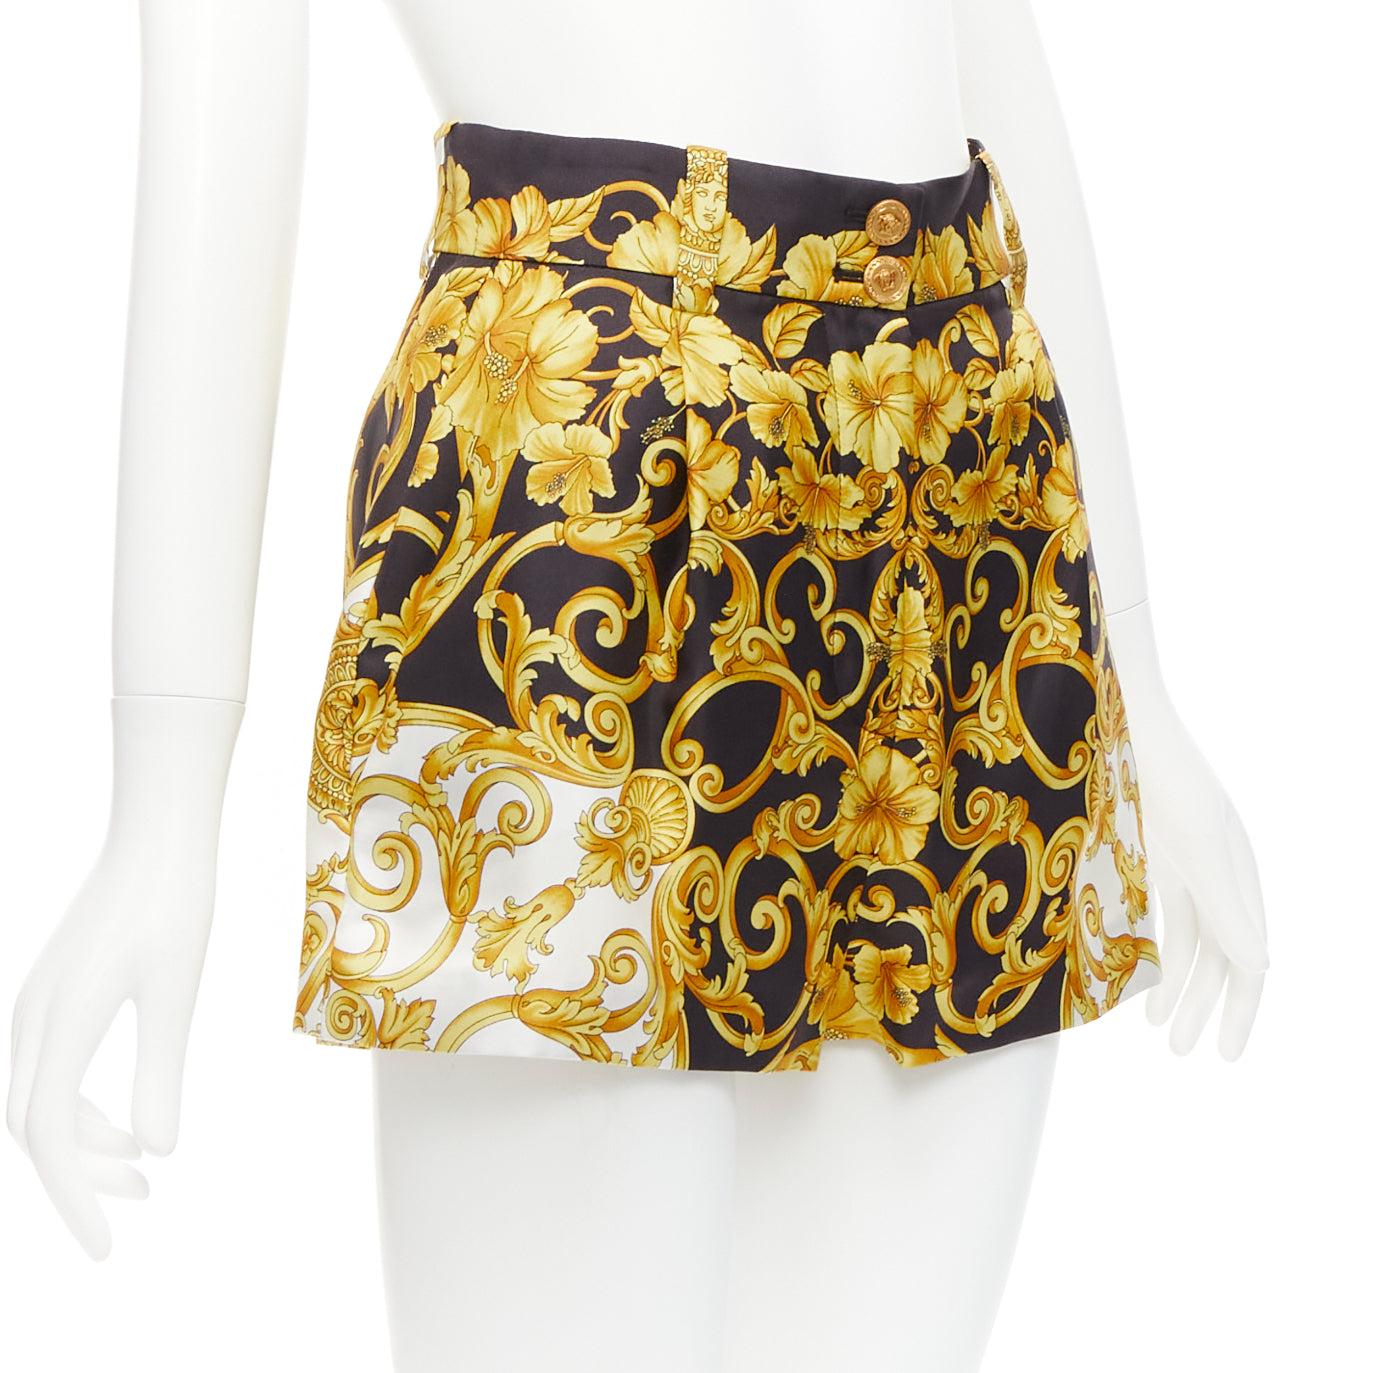 VERSACE 2018 Tribute 100% silk Barocco Hibiscus print high waist shorts IT38 XS
Reference: AAWC/A00573
Brand: Versace
Designer: Donatella Versace
Collection: 2018
Material: 100% Silk
Color: Gold, Black
Pattern: Floral
Closure: Zip Fly
Extra Details: